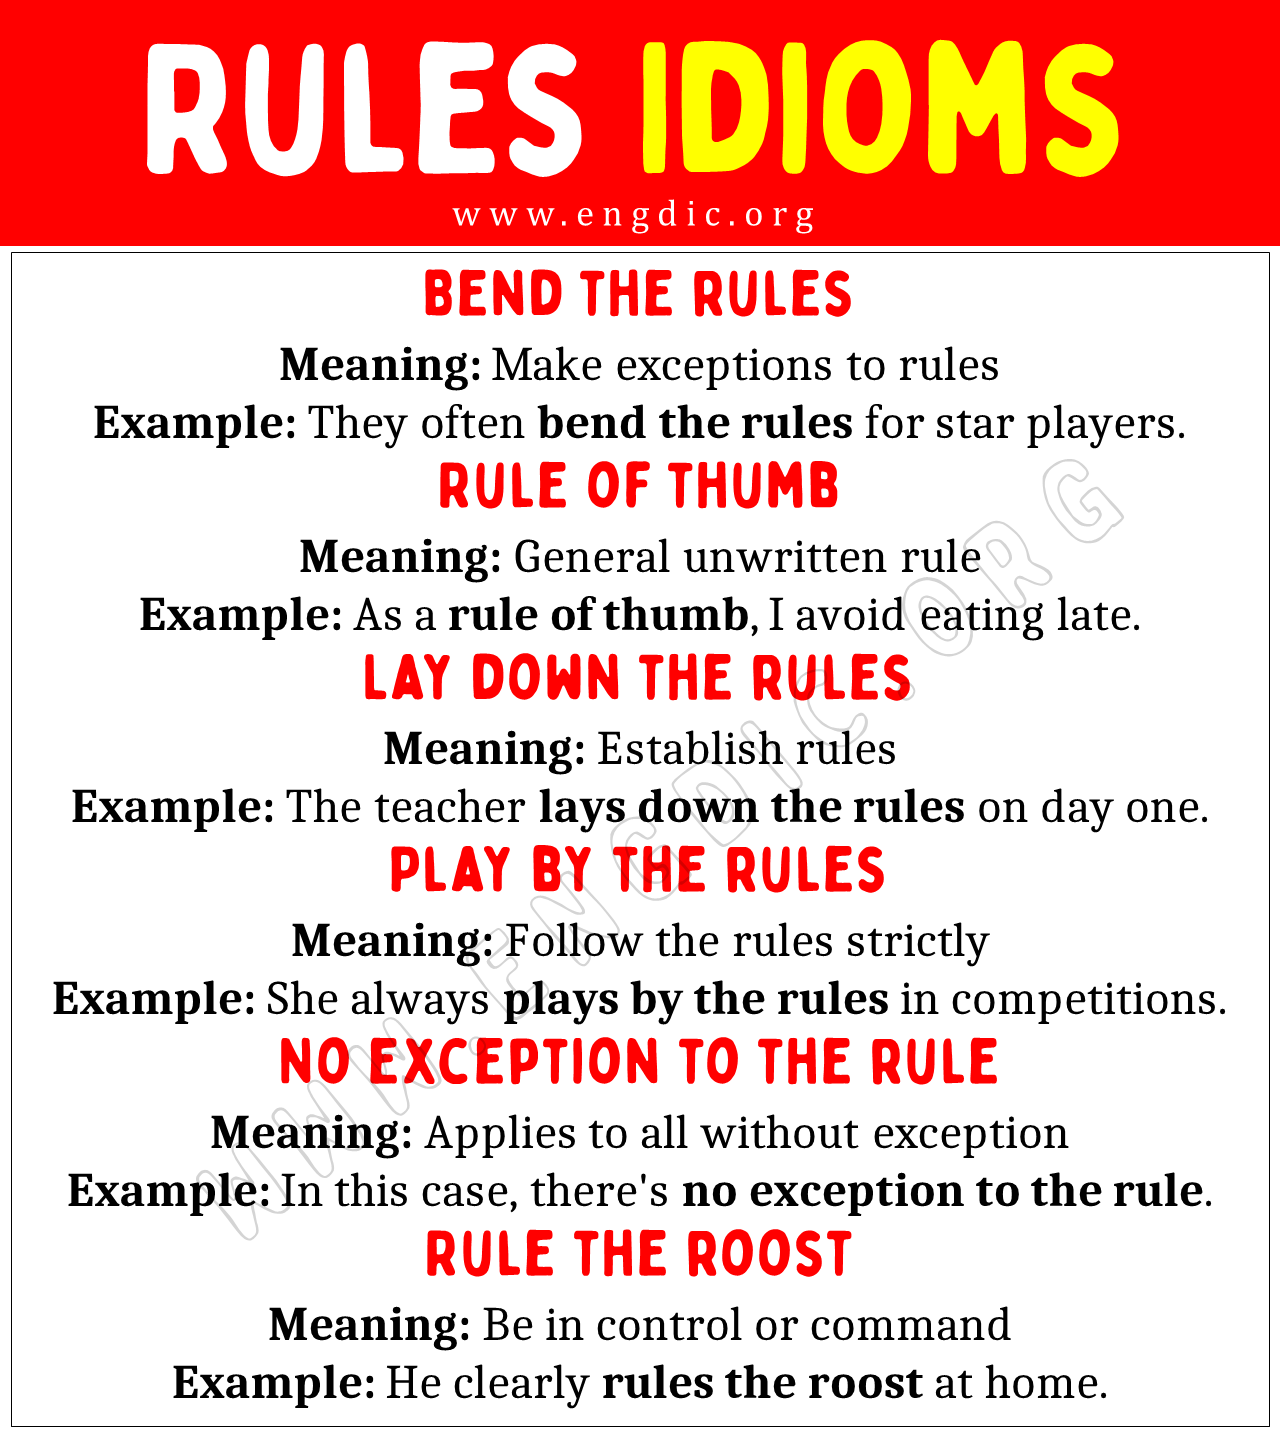 Rules Idioms